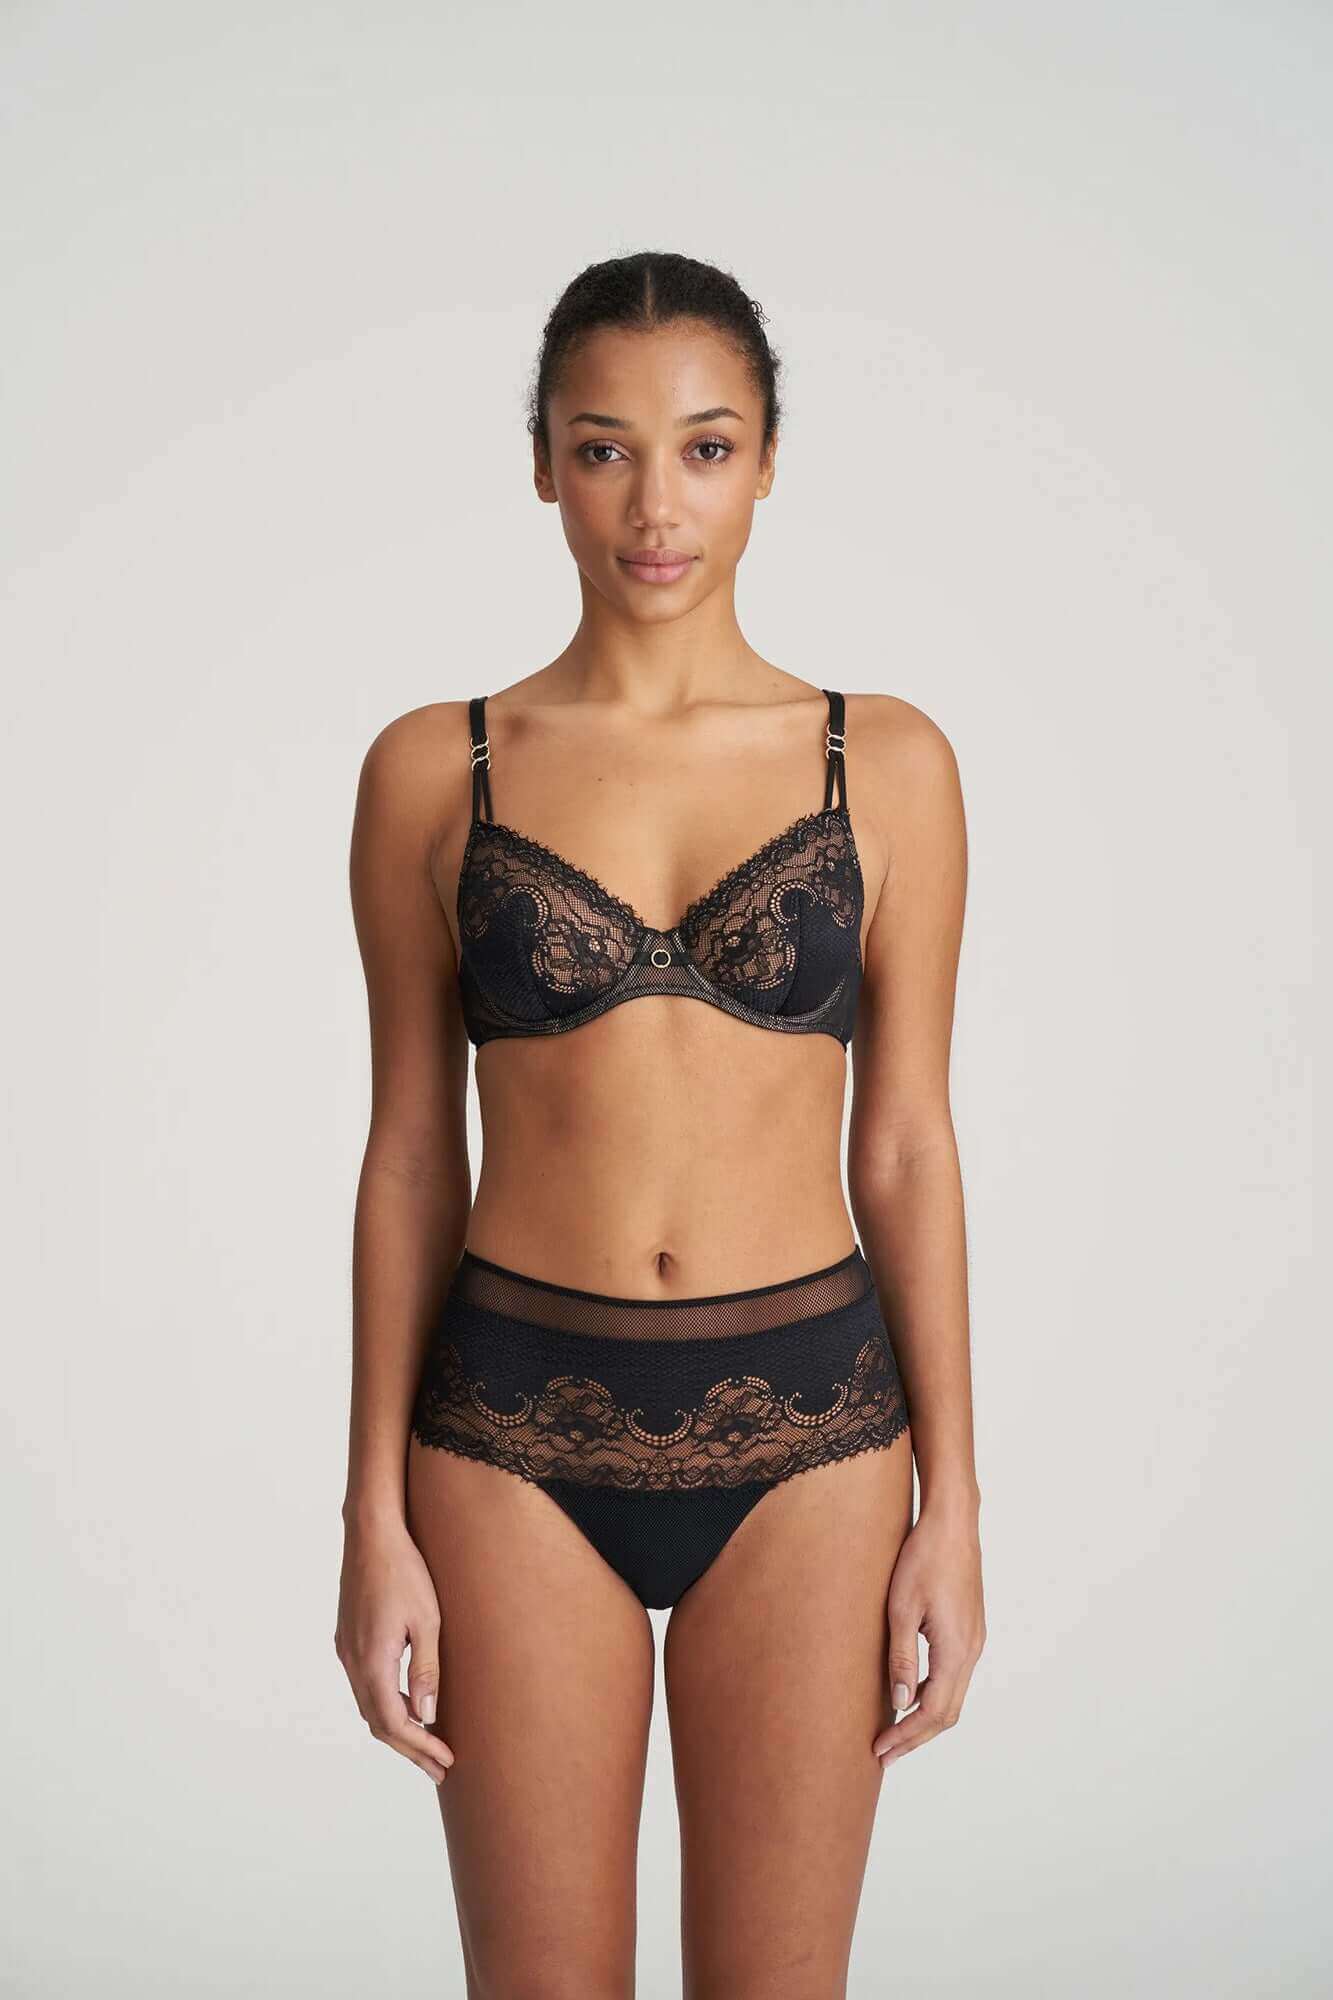 Discover the Perfect Fit with Marie Jo lingerie from Petticoat